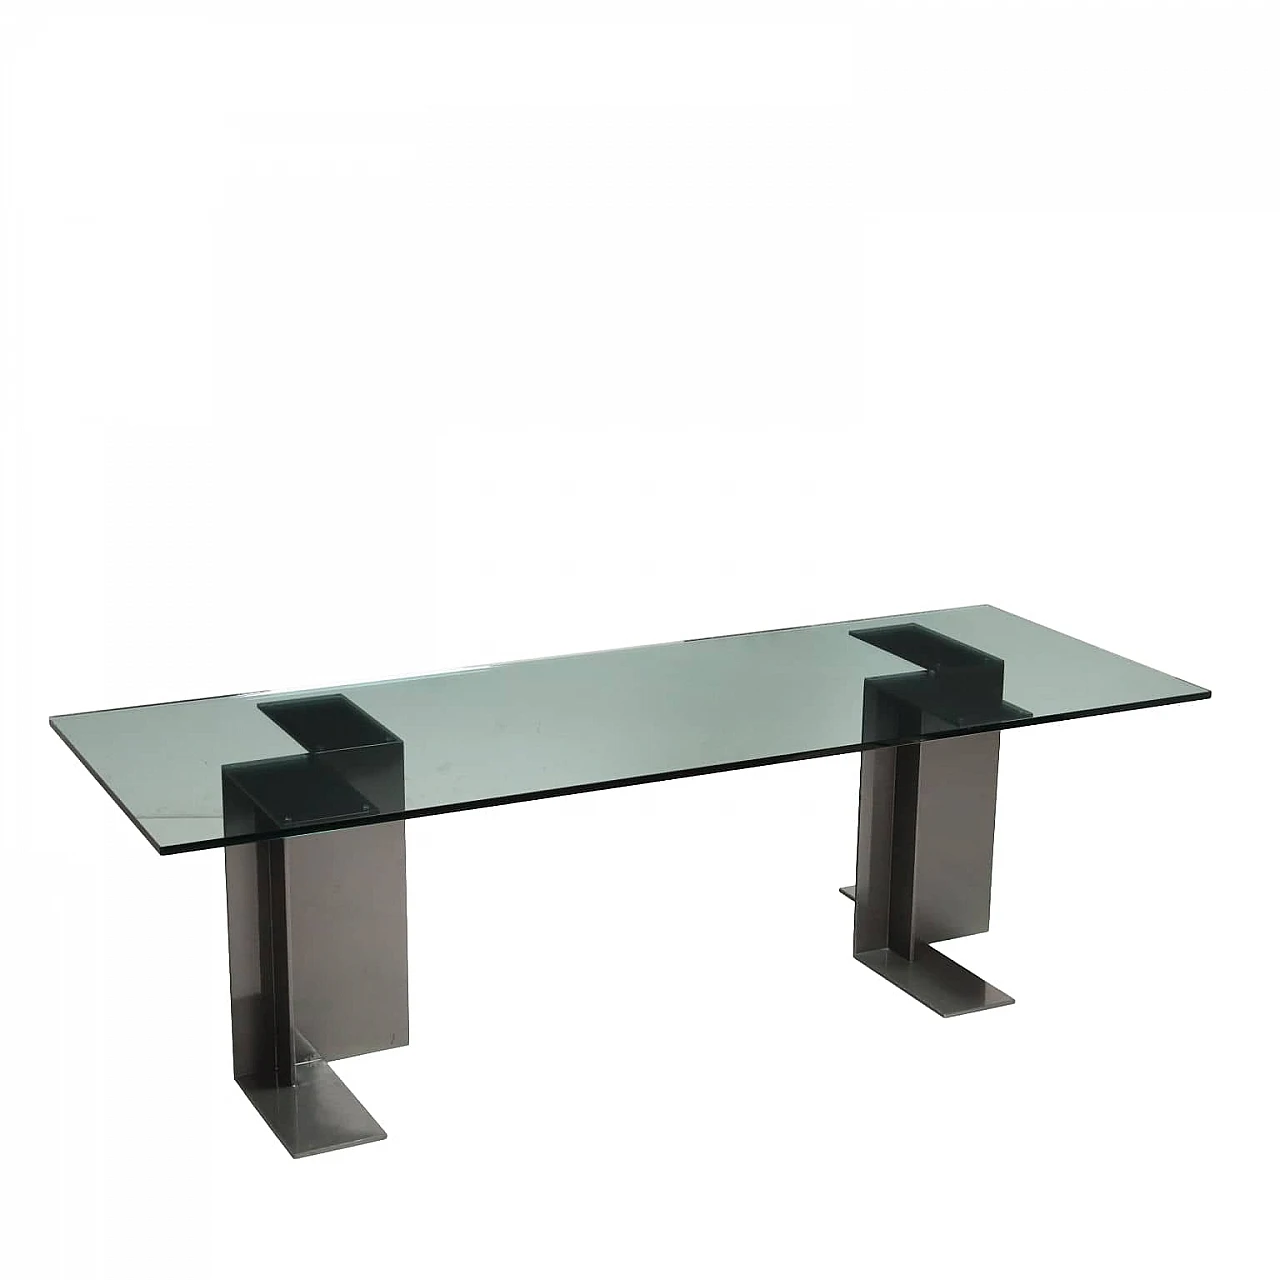 Crystal T27 Bordighera table by L. C. Dominioni for Azucena, 1980s 1